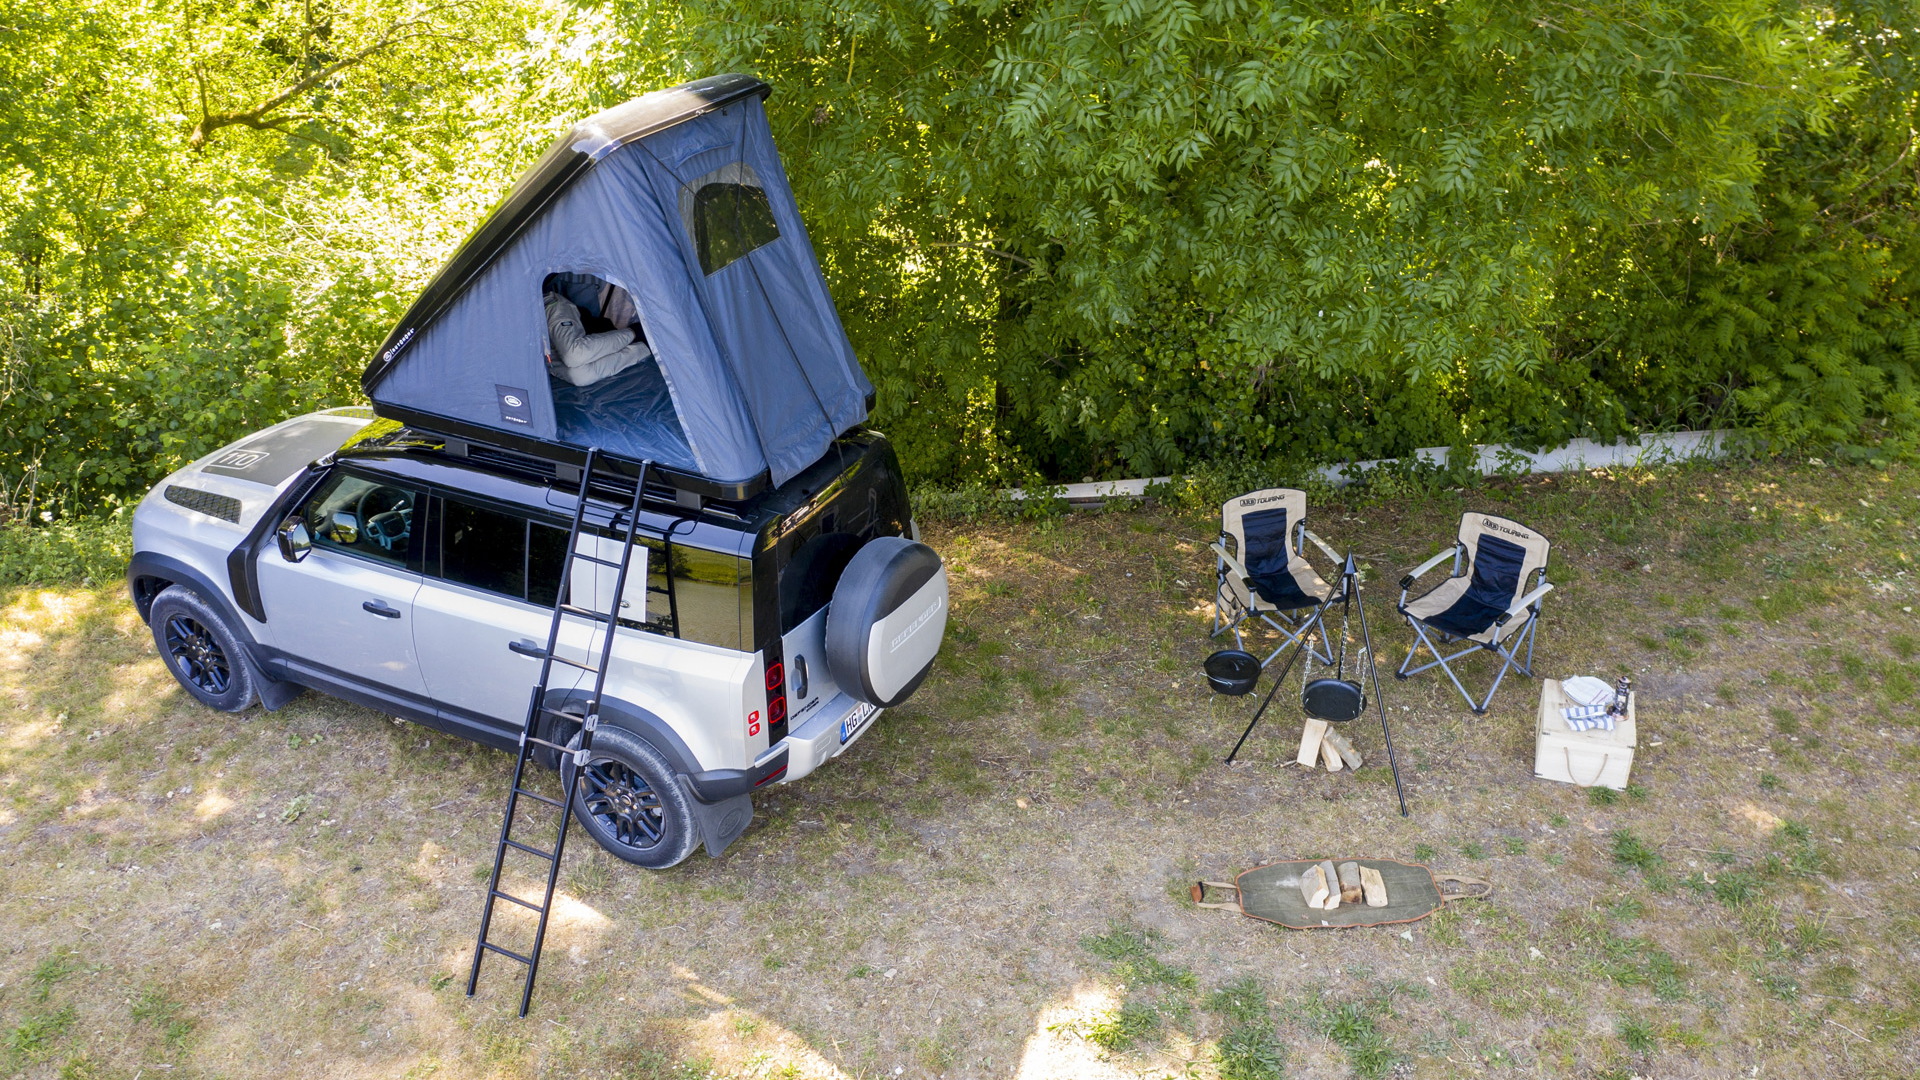 2020 Land Rover Defender 110 with Autohome roof tent